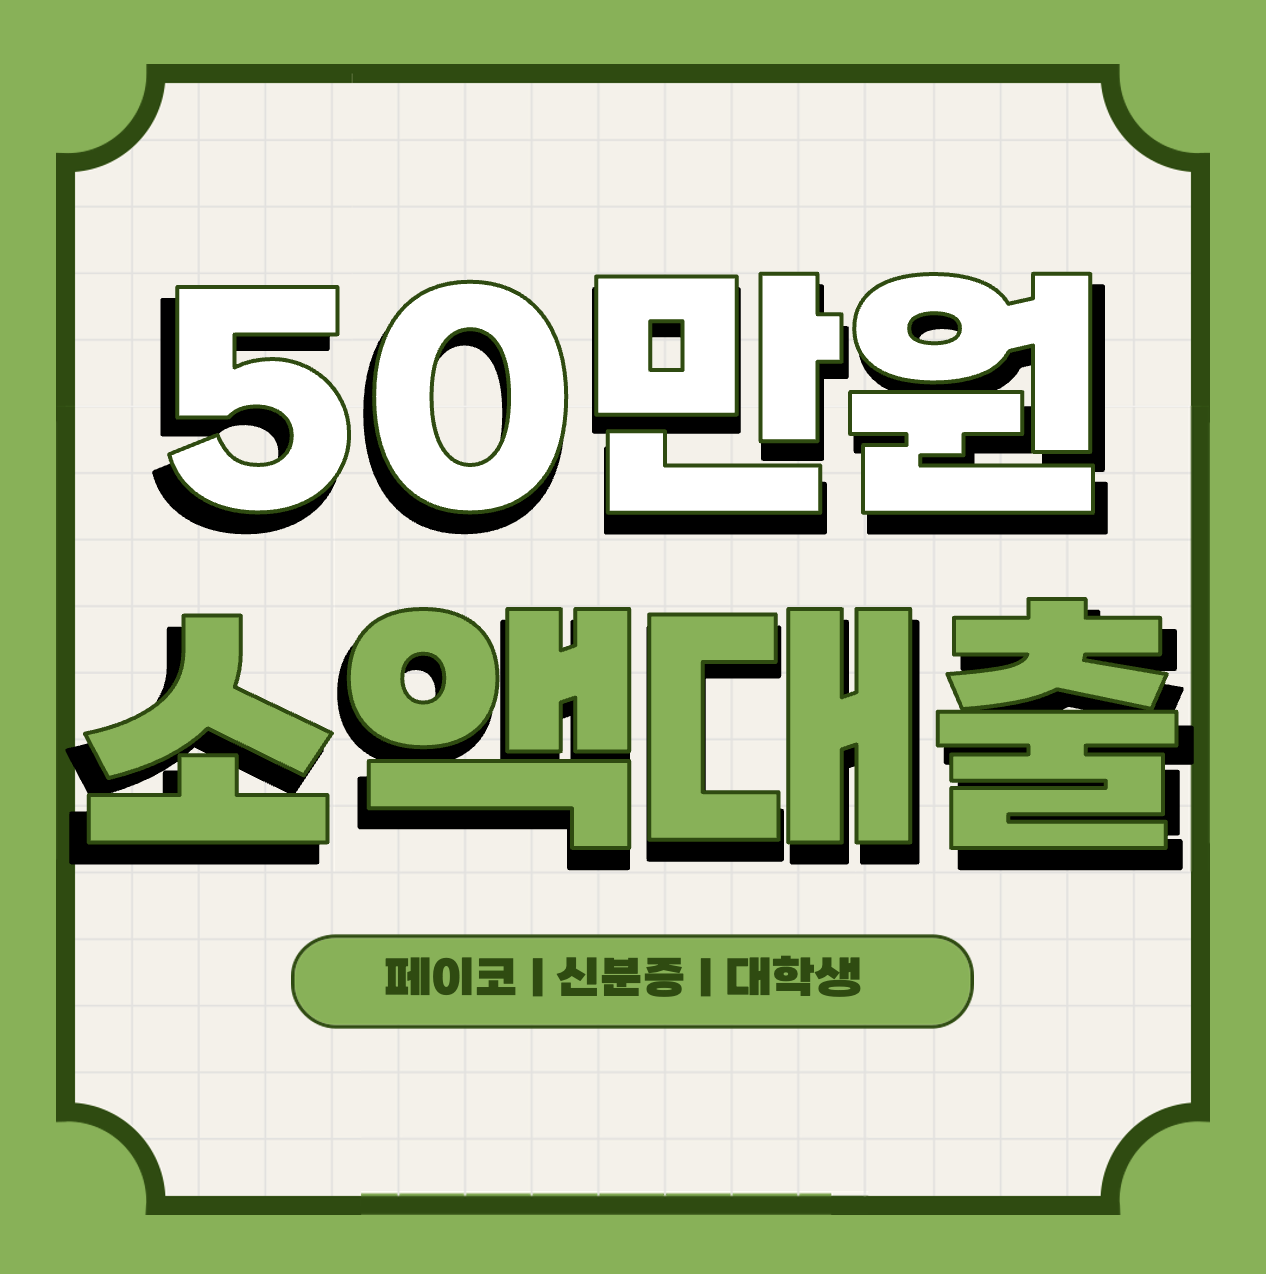 This is 50만원 소액 대출